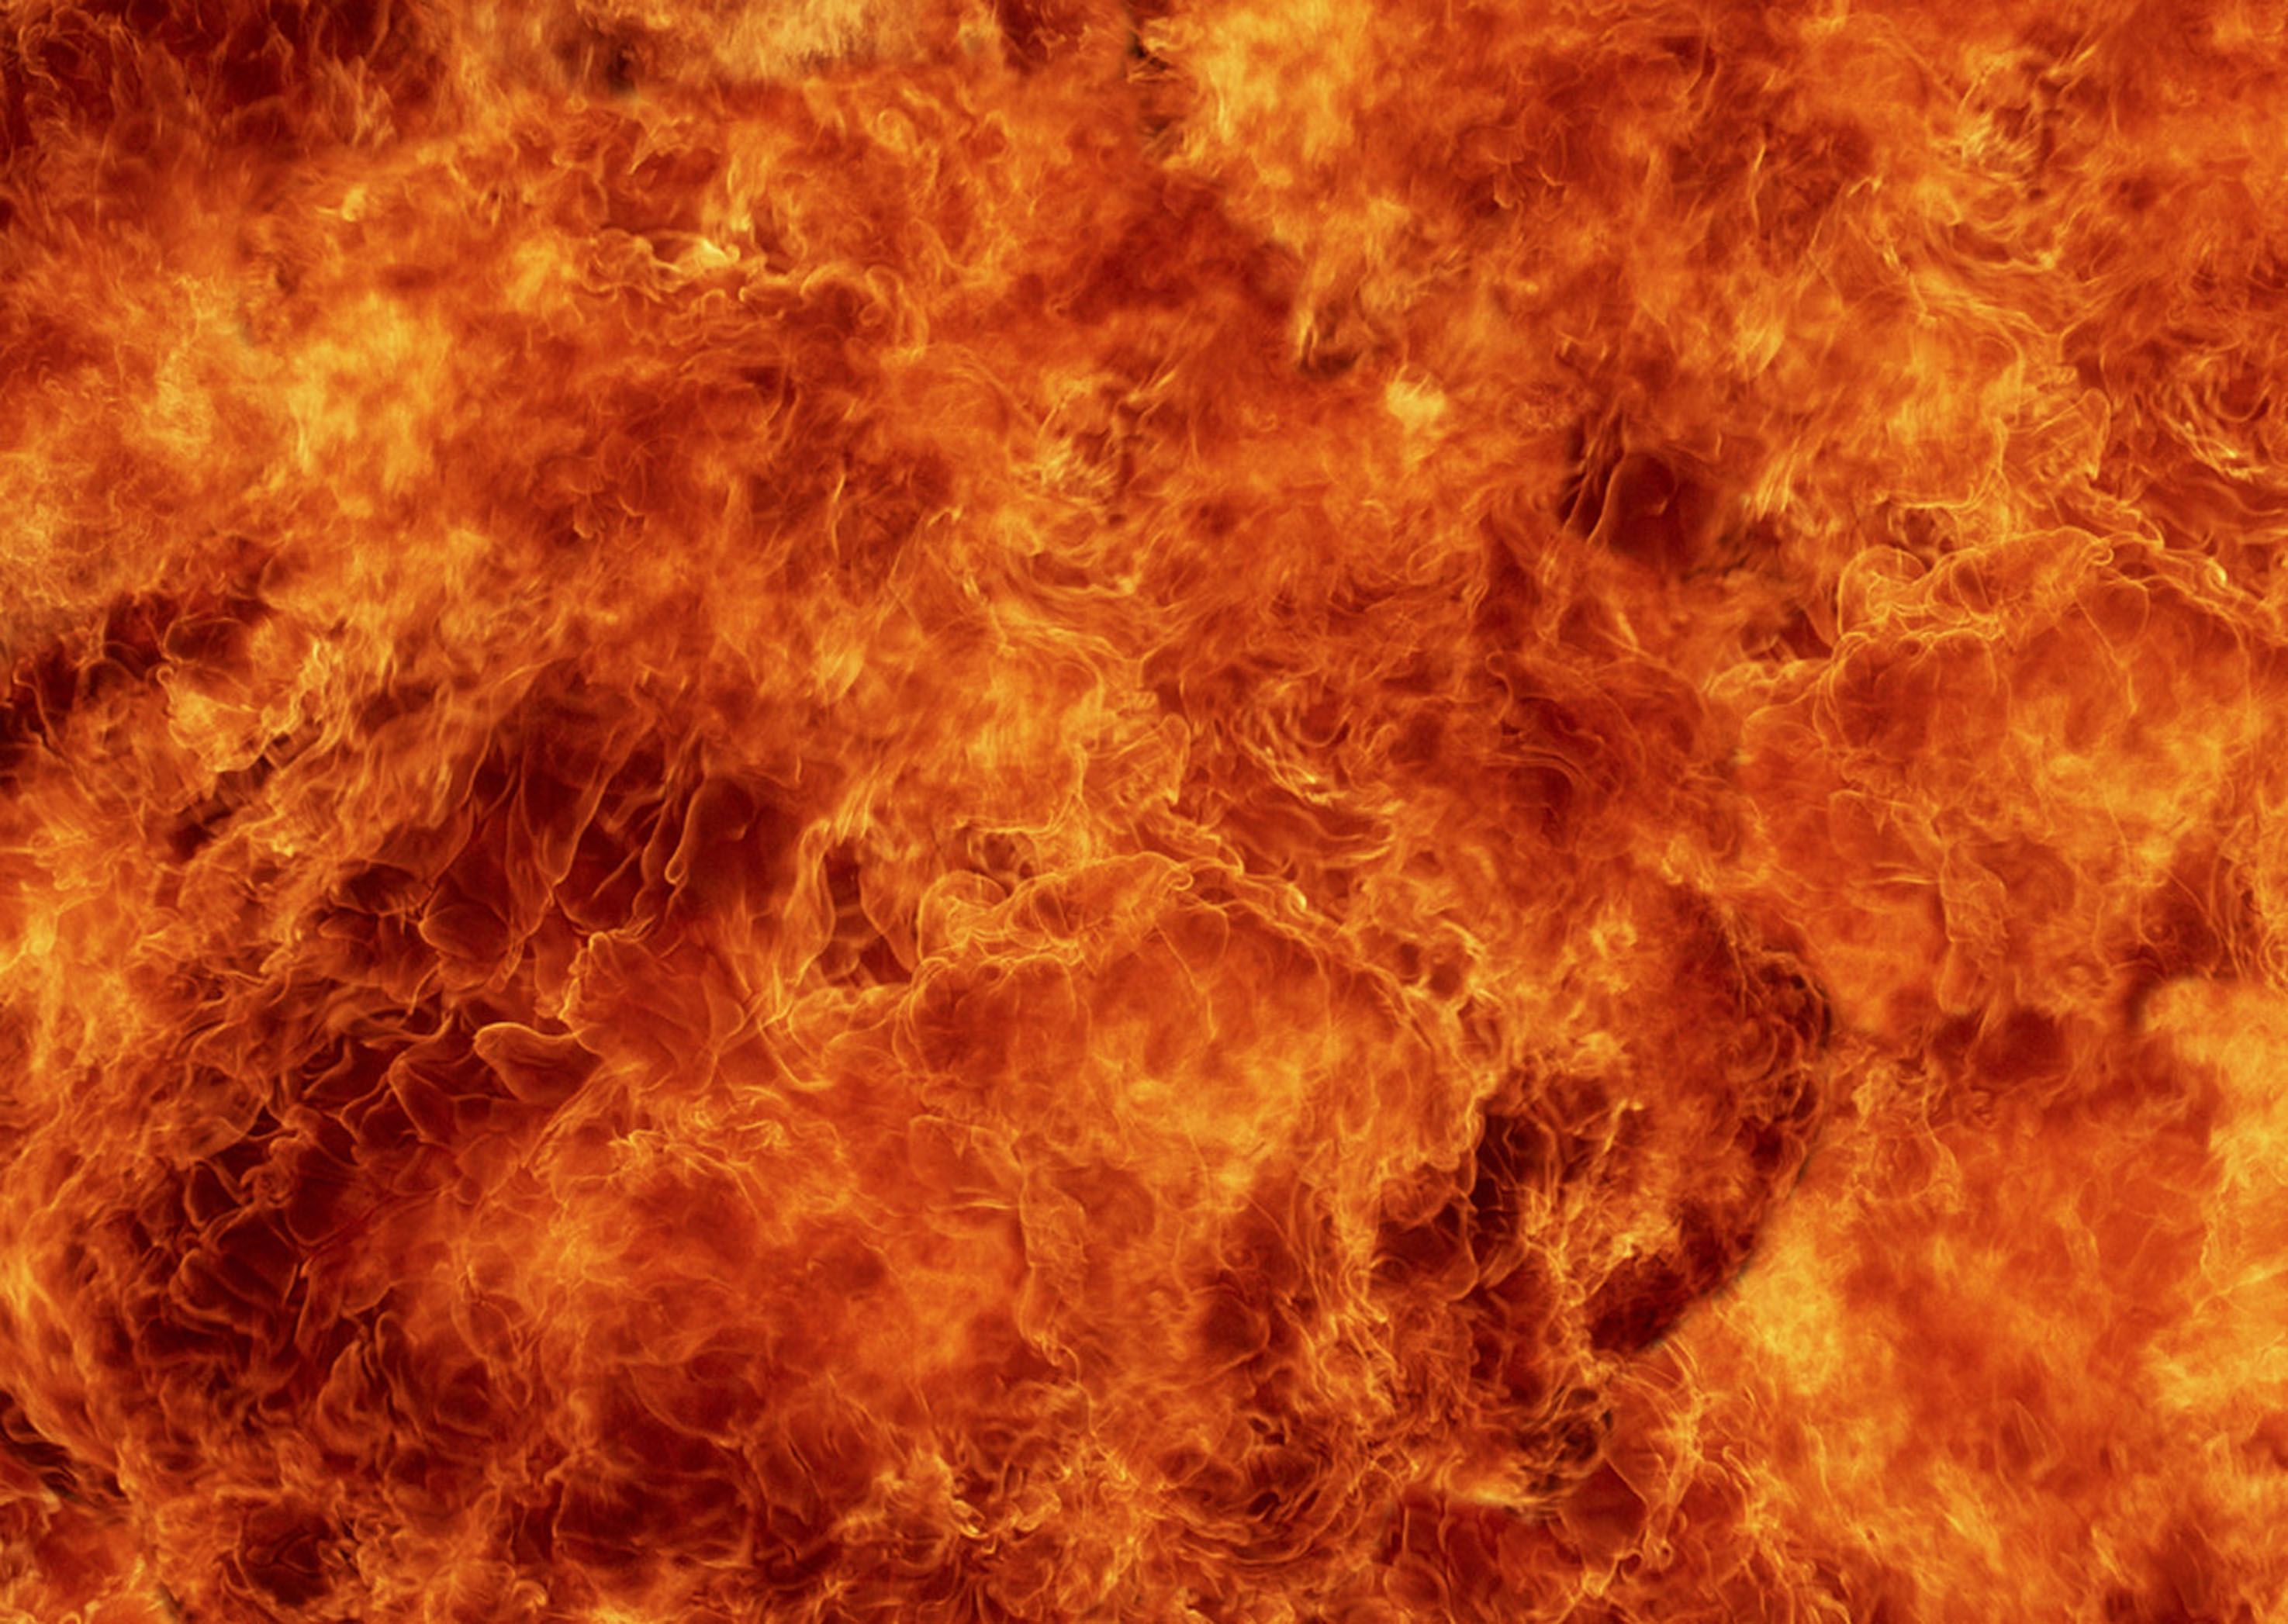 Fire Backgrounds